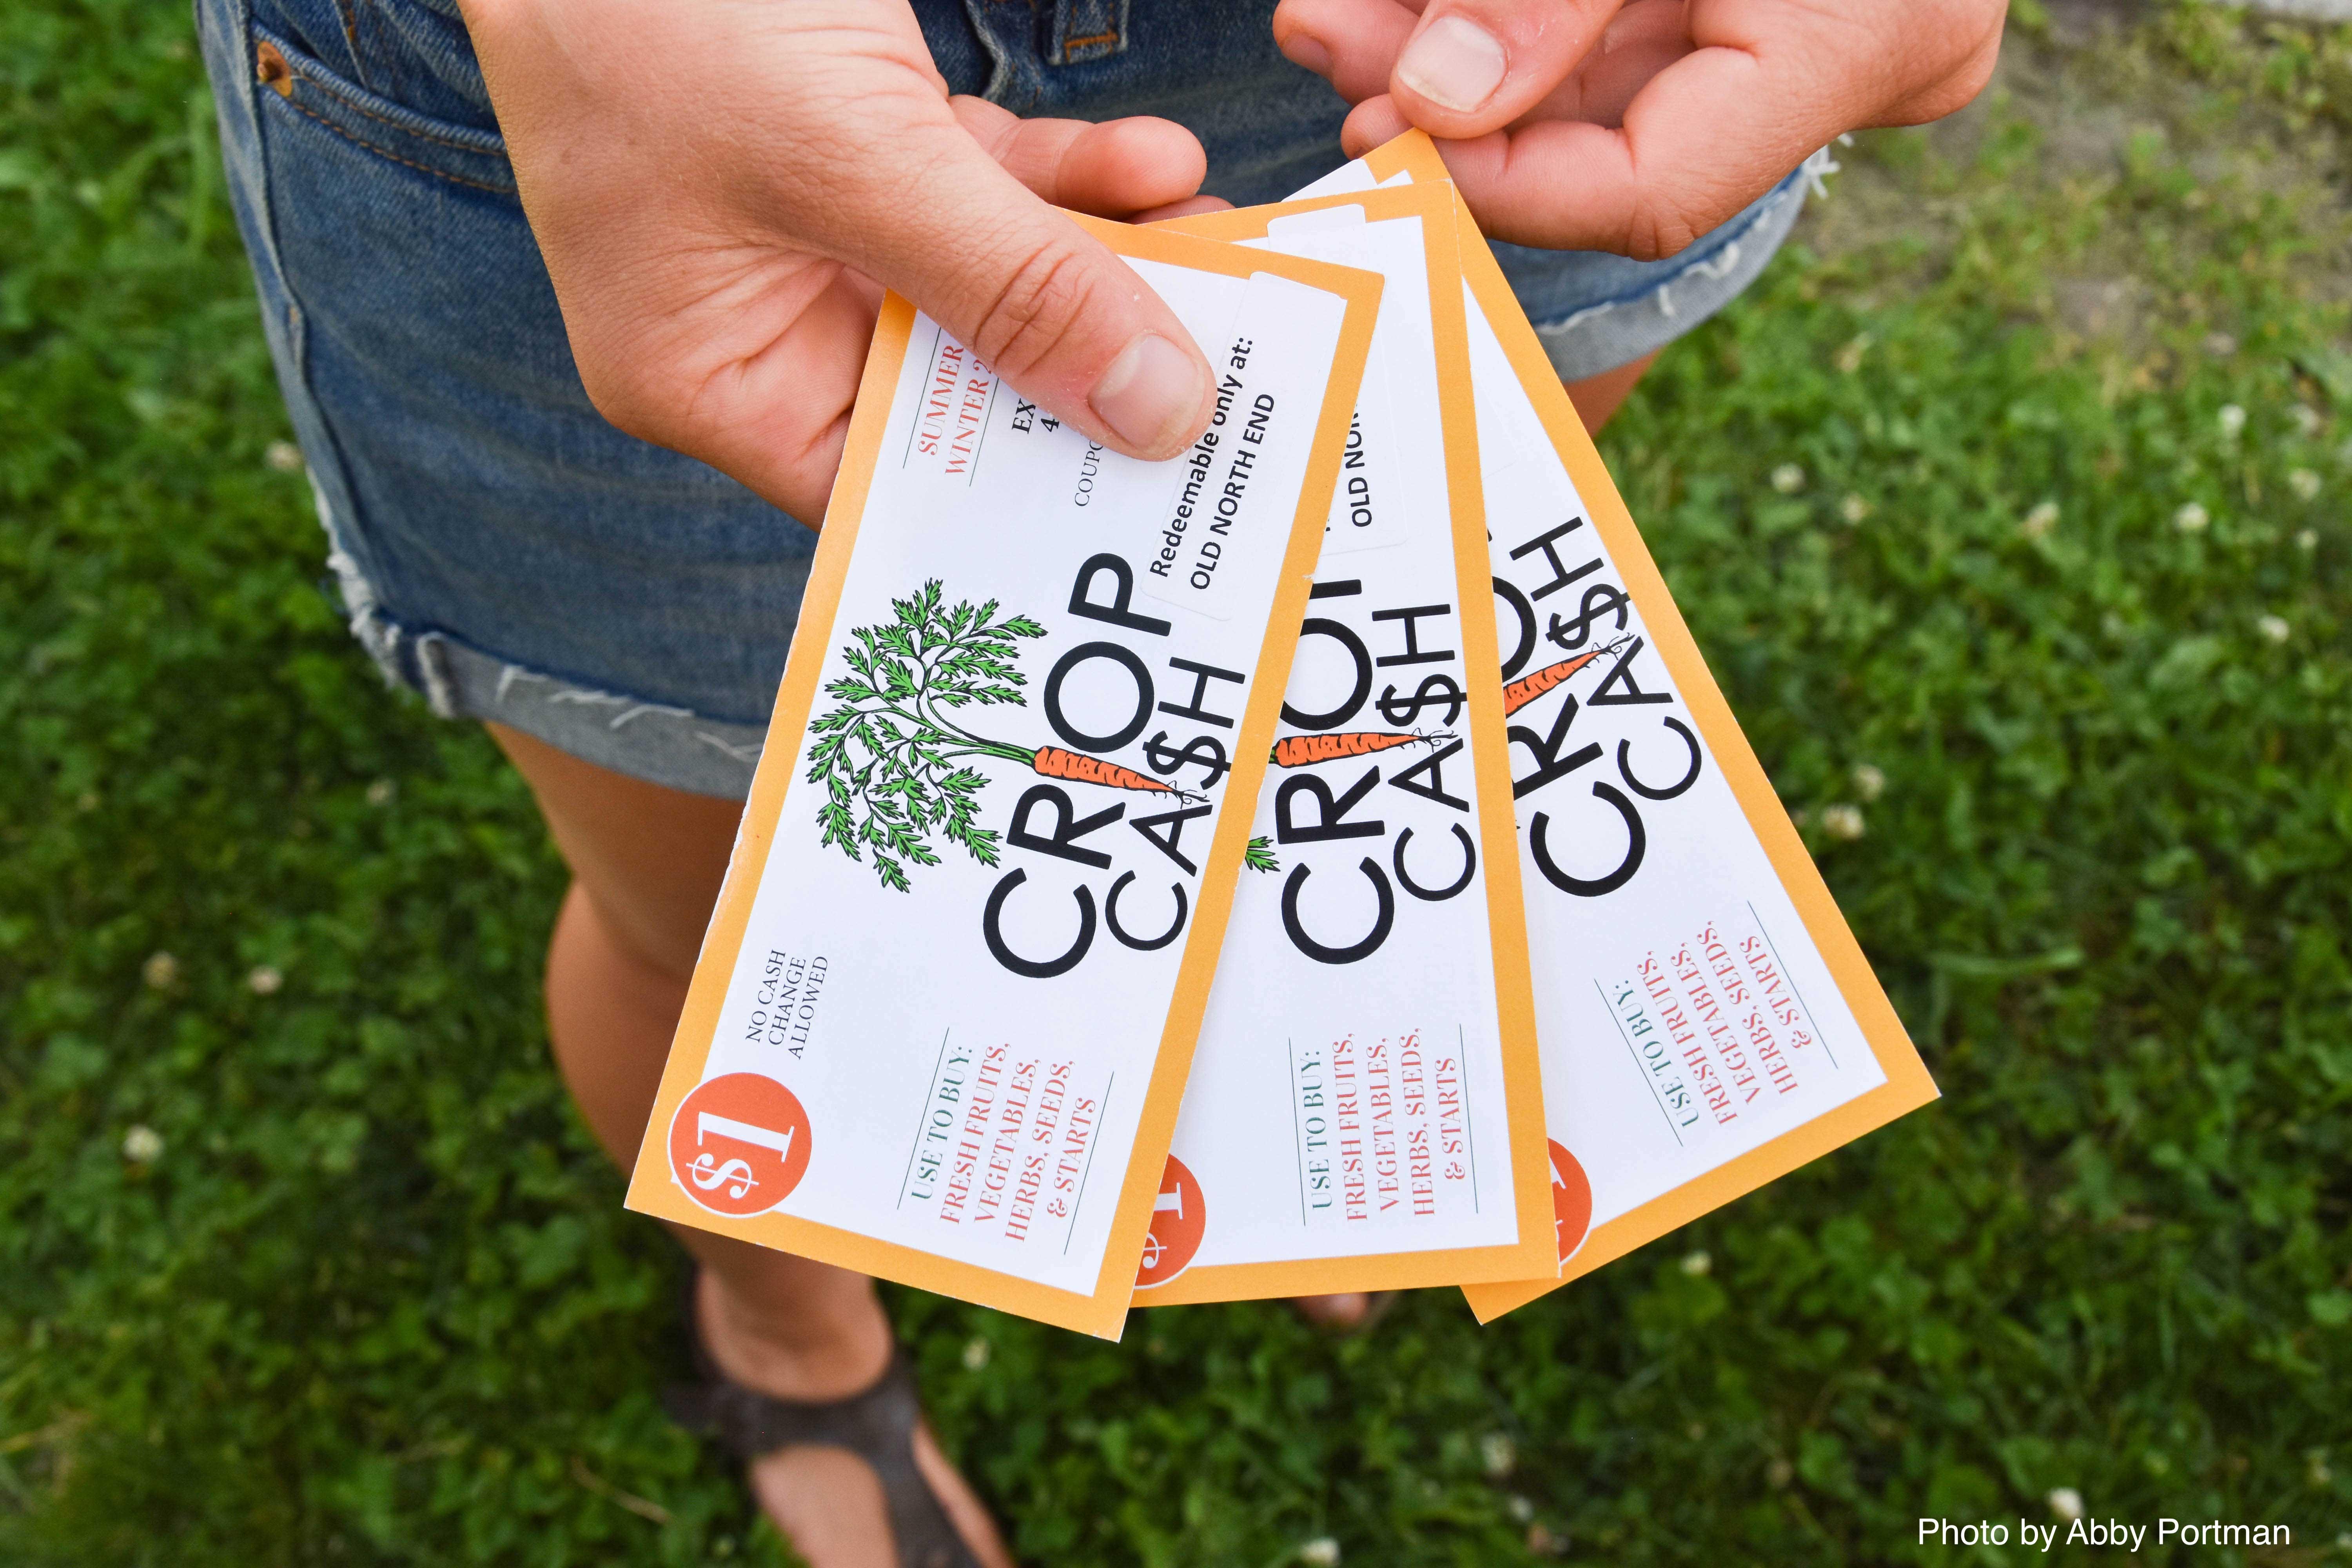 A farmers market customer holding three Crop Cash coupons